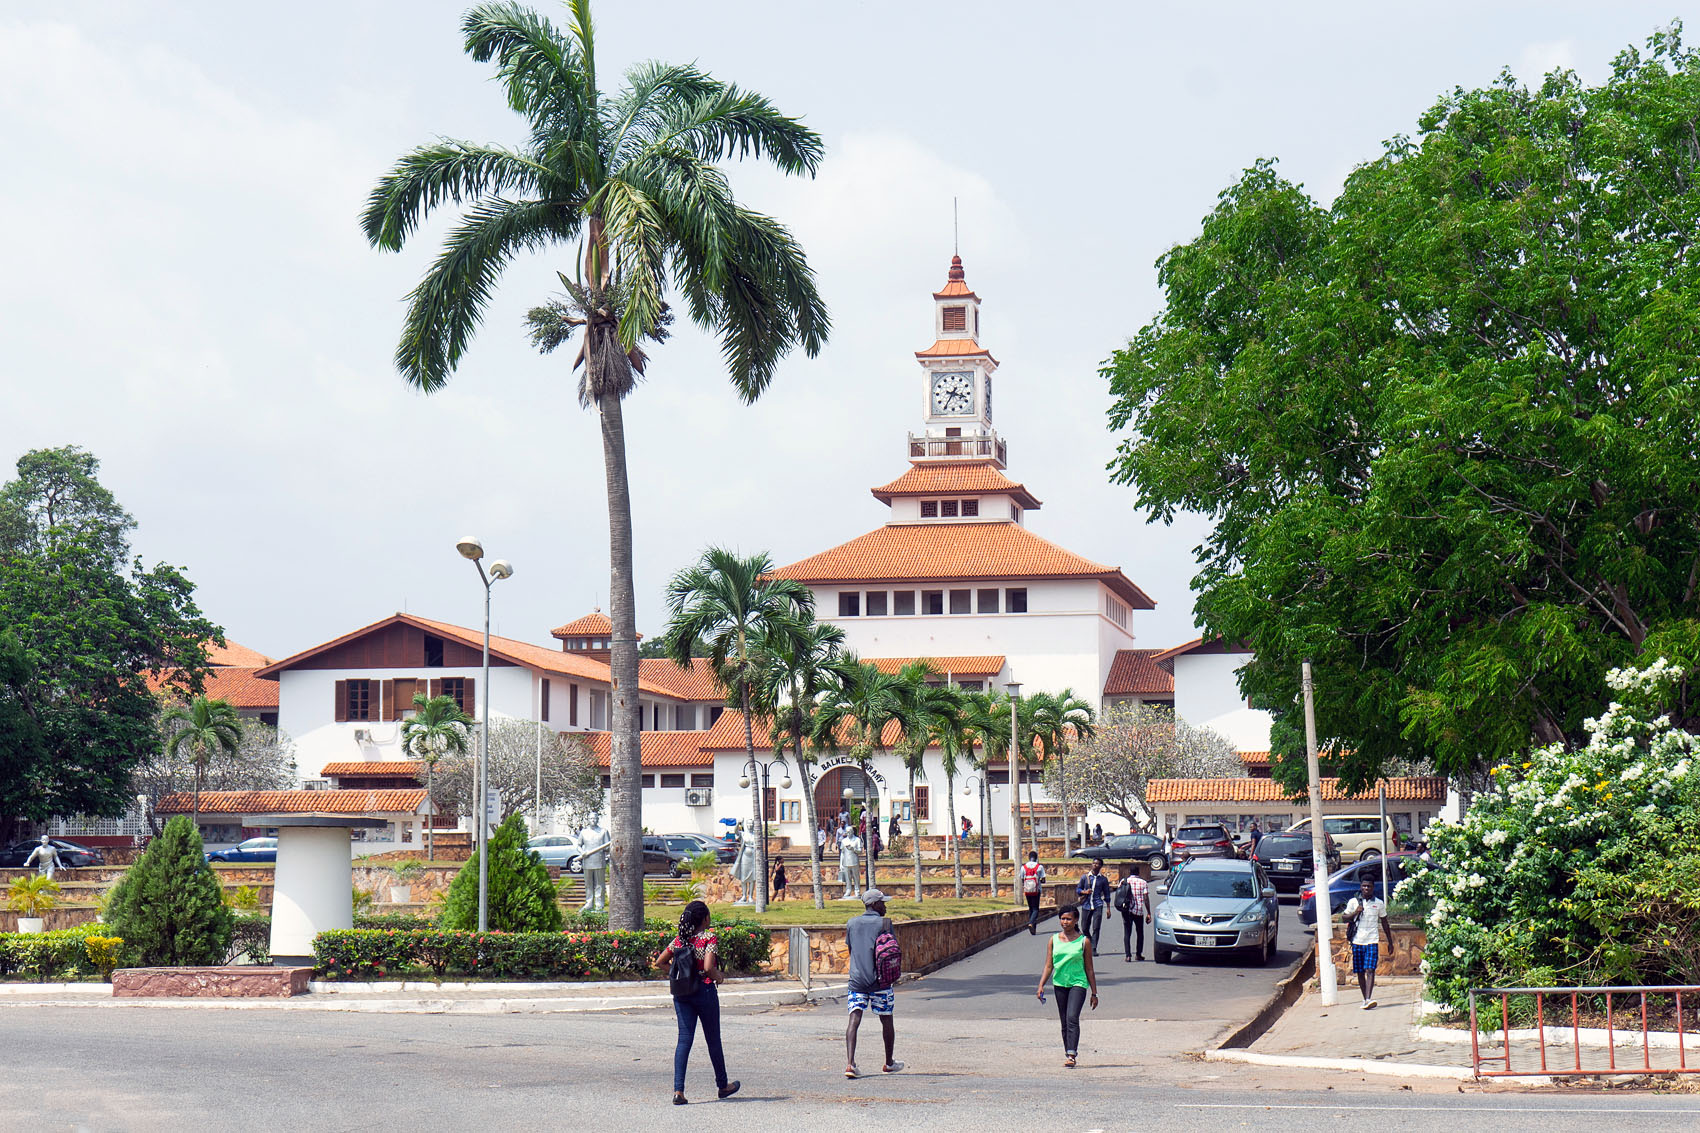 The management of the University of Ghana has defended the 15% increment in academic user fees saying they were based on approvals by the parliament